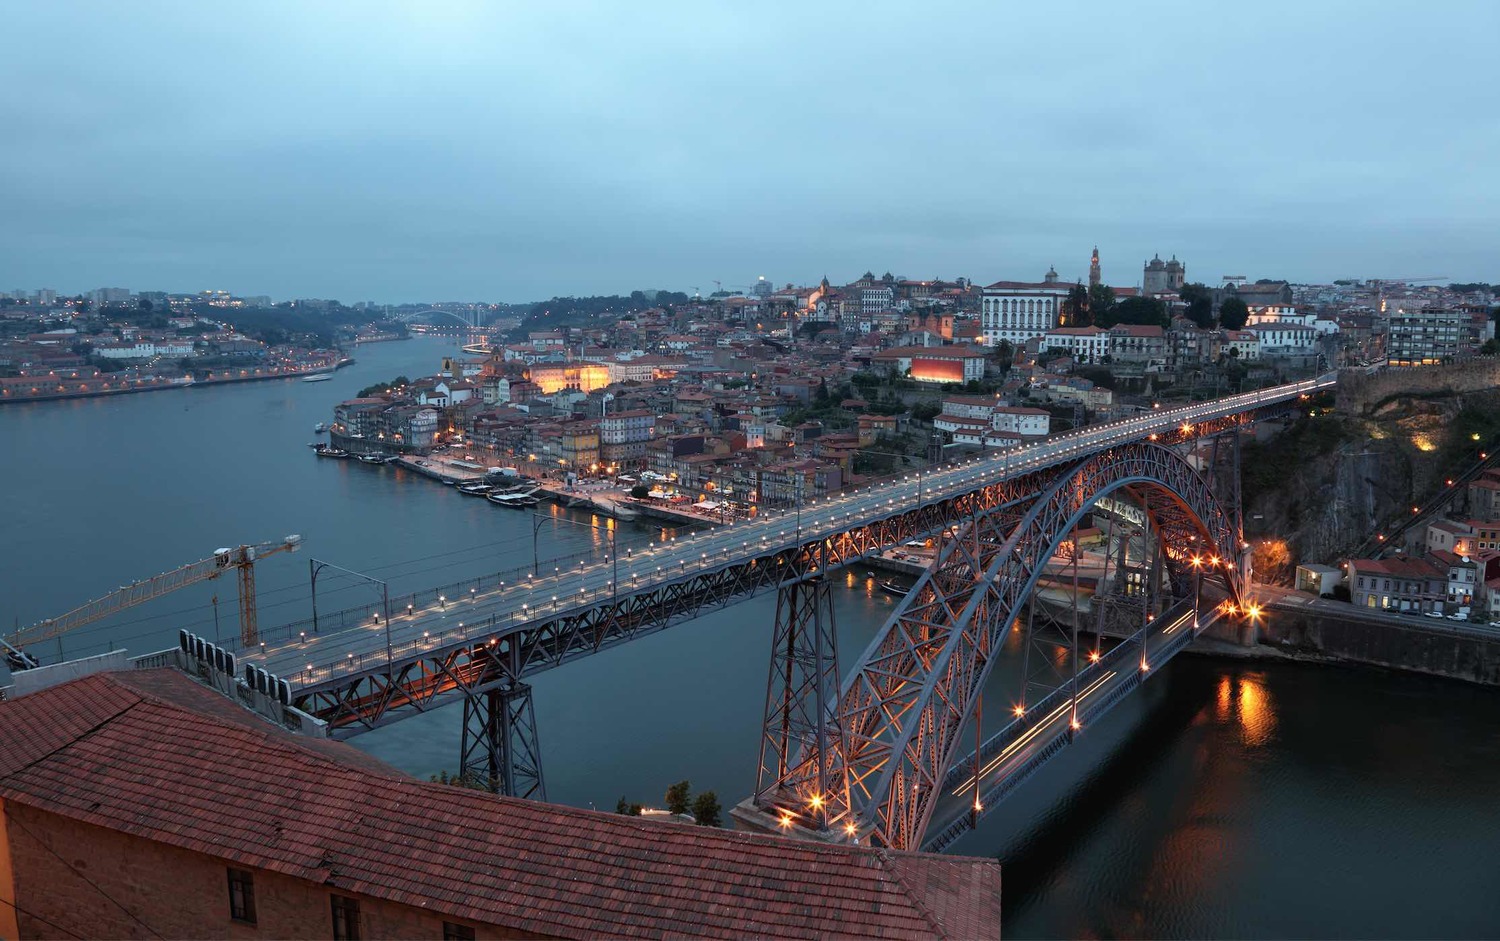 Hotels+with+a+View+in+Porto.jpg